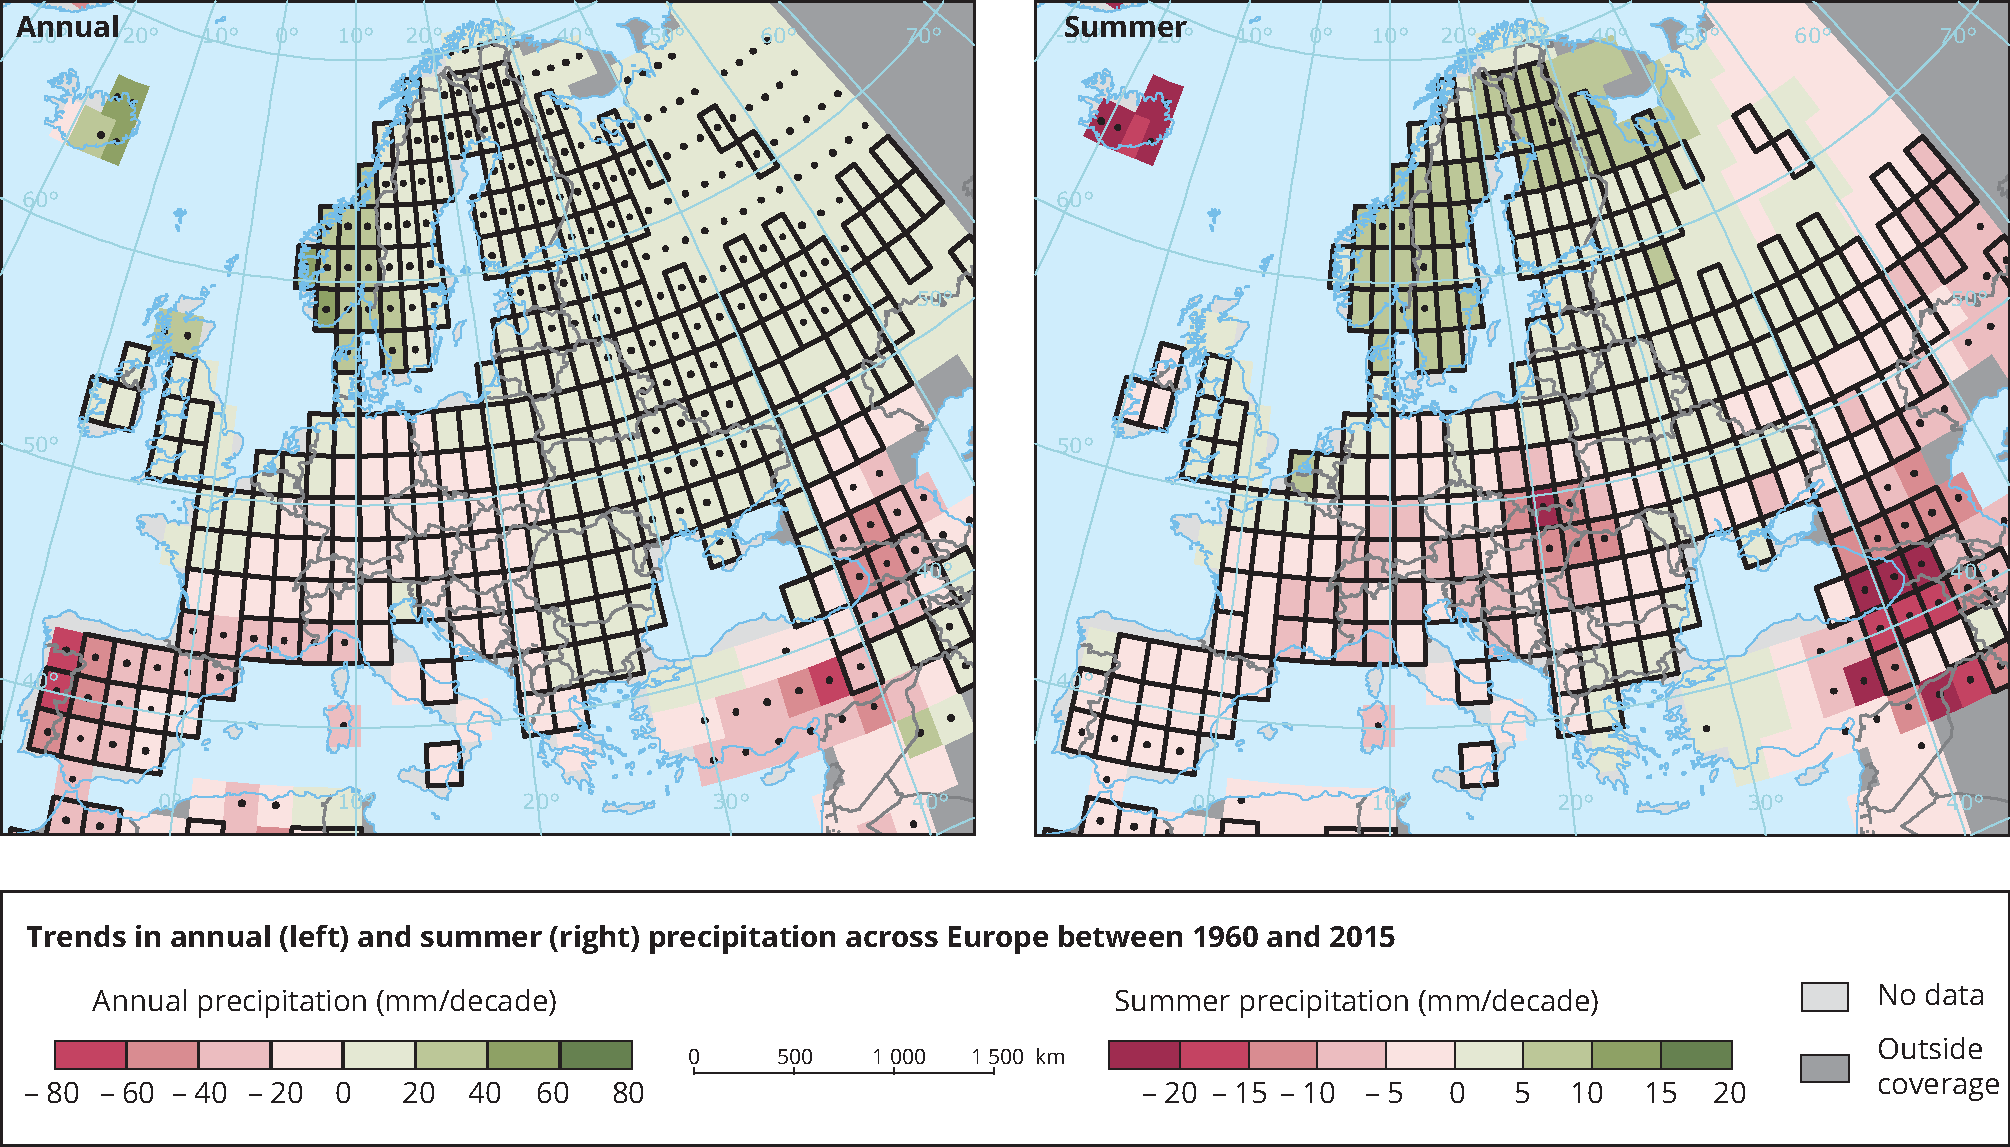 Trends in annual and summer precipitation across Europe between 1960 and 2015